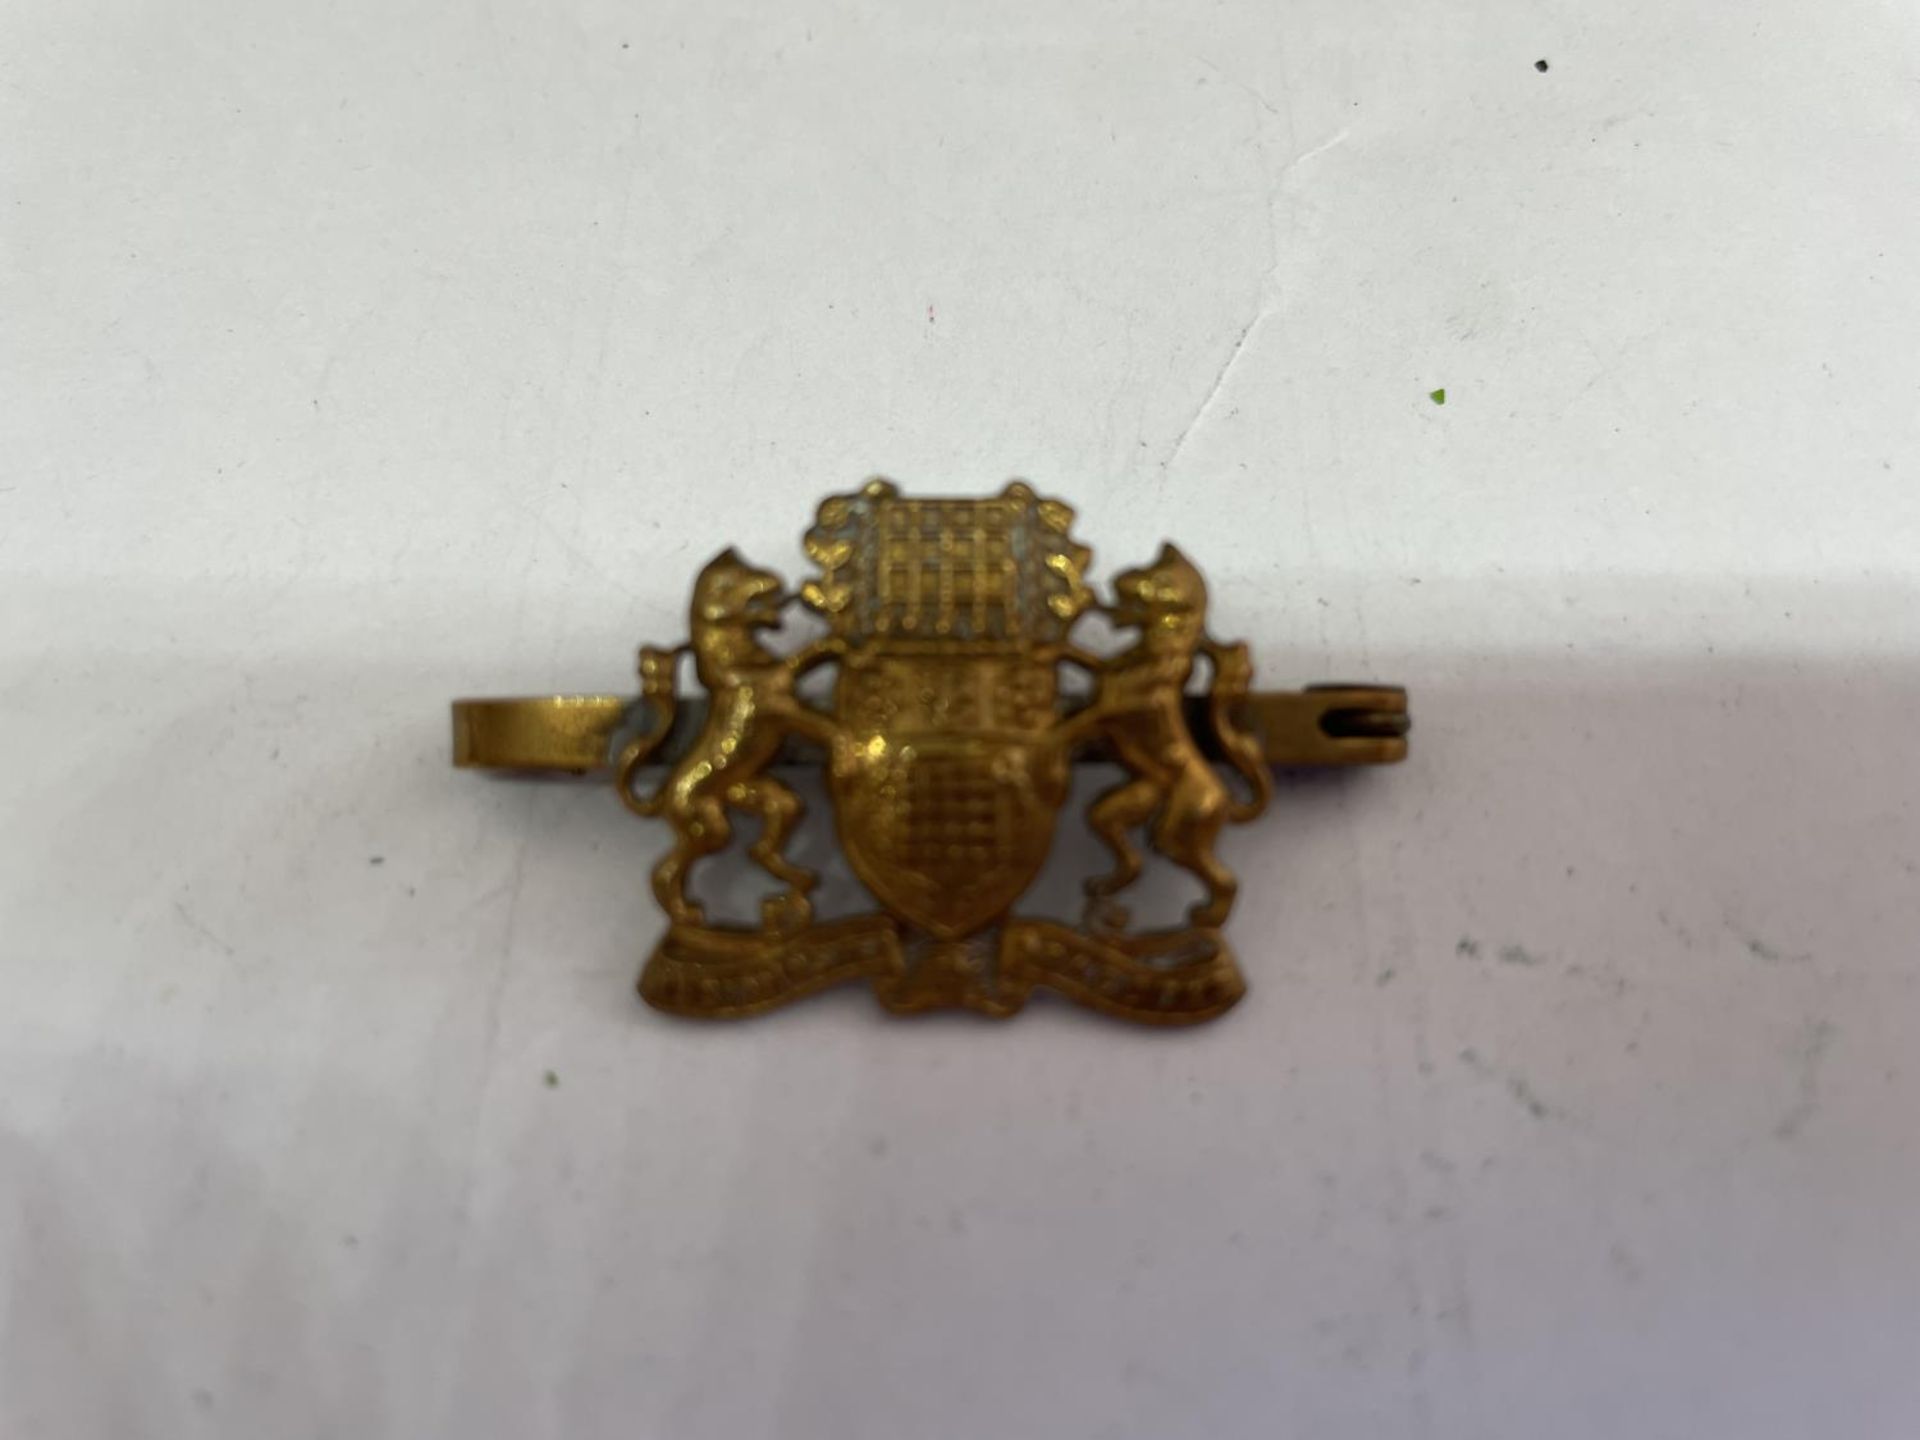 A MILITARY BADGE - WESTMINSTER DRAGOONS - Image 2 of 3